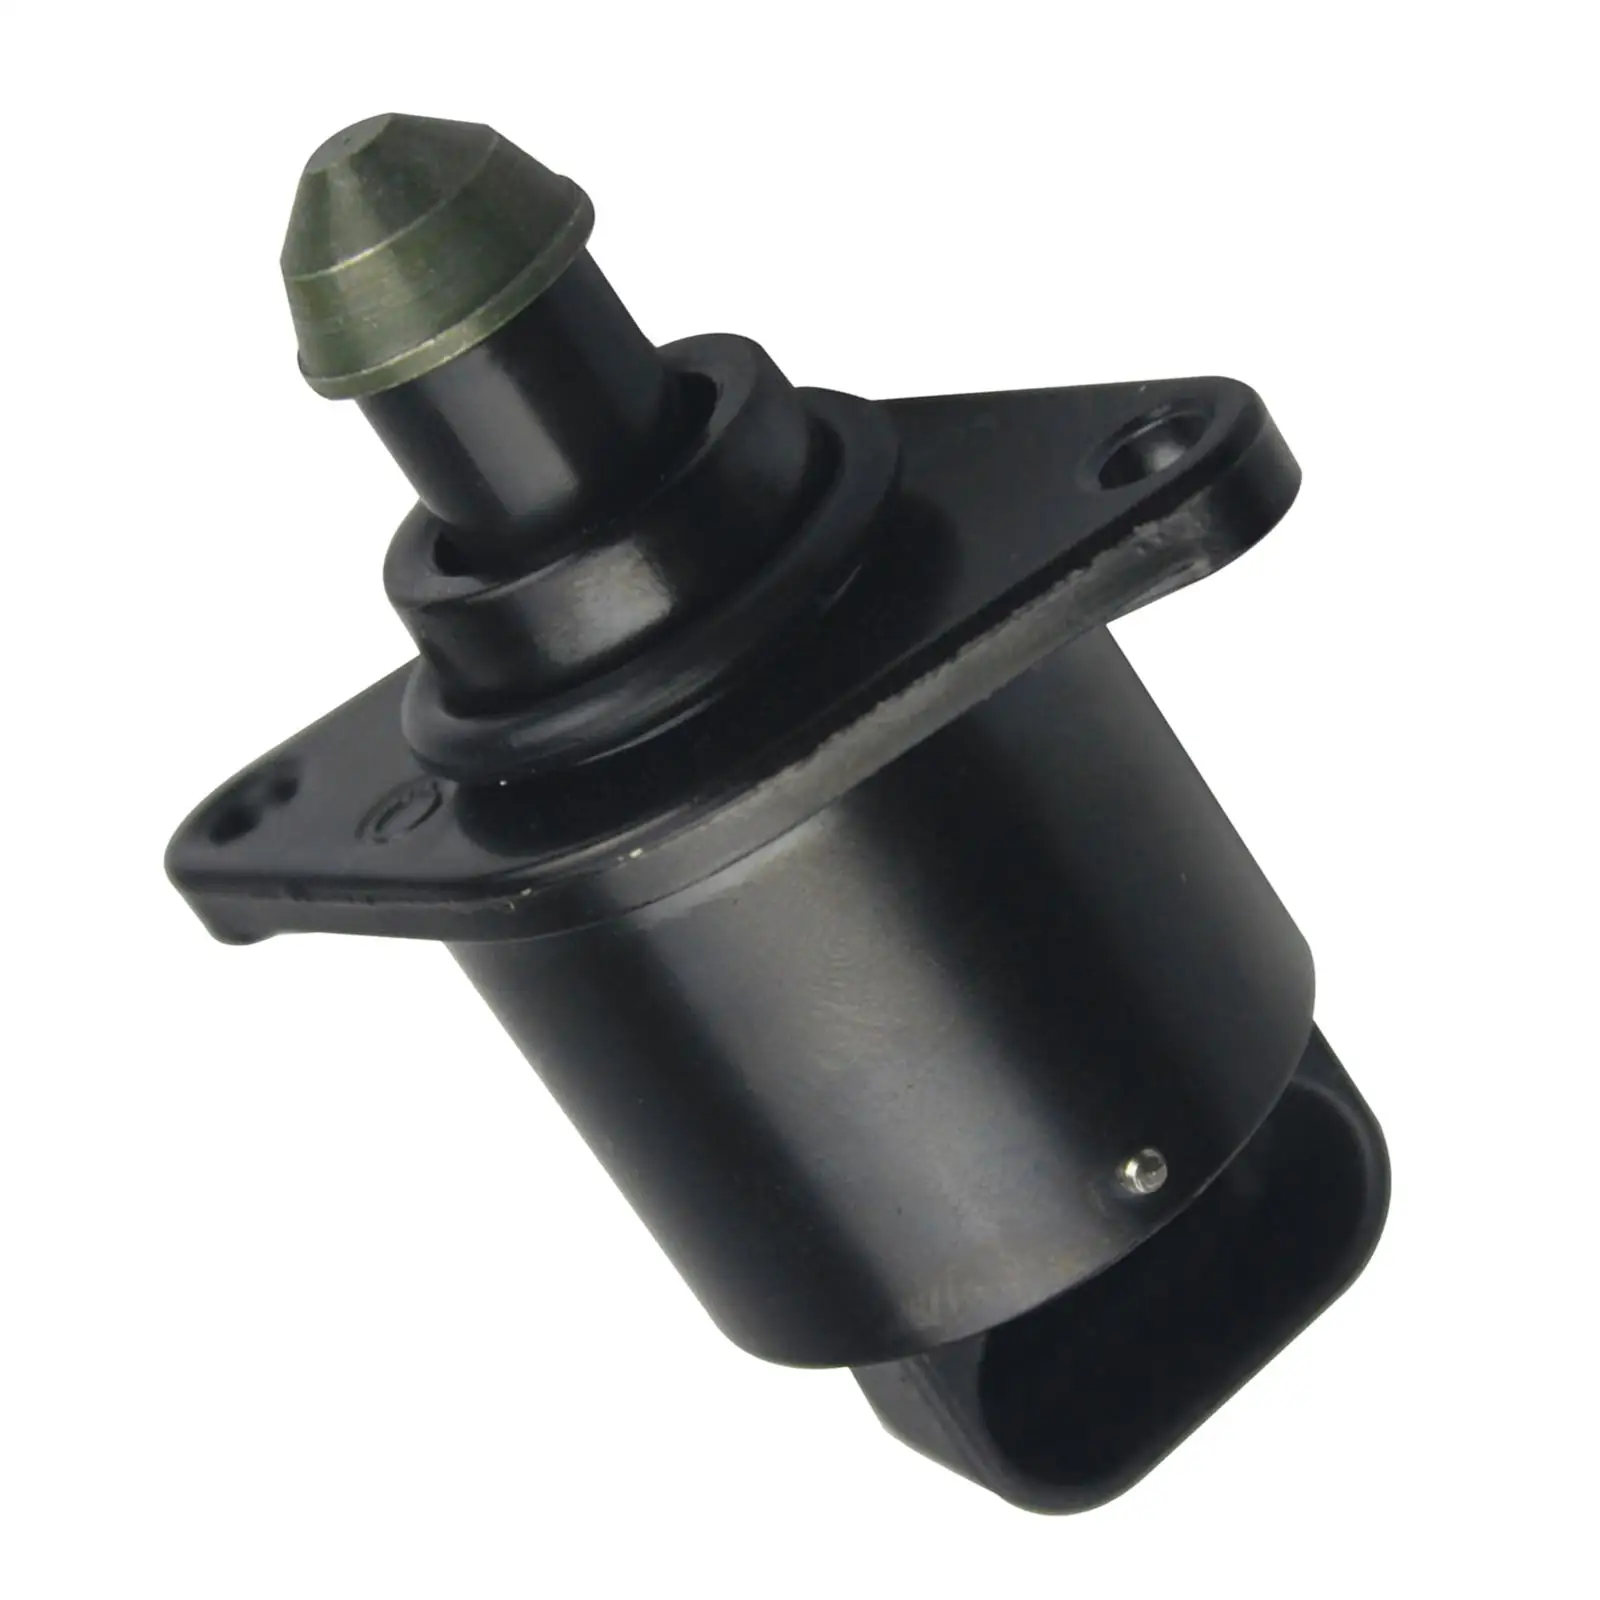 Idle Air Control Valve Car Supplies Vehicle Parts Interior Replacement for W150 W250 53030657Ab 53030450 17119277